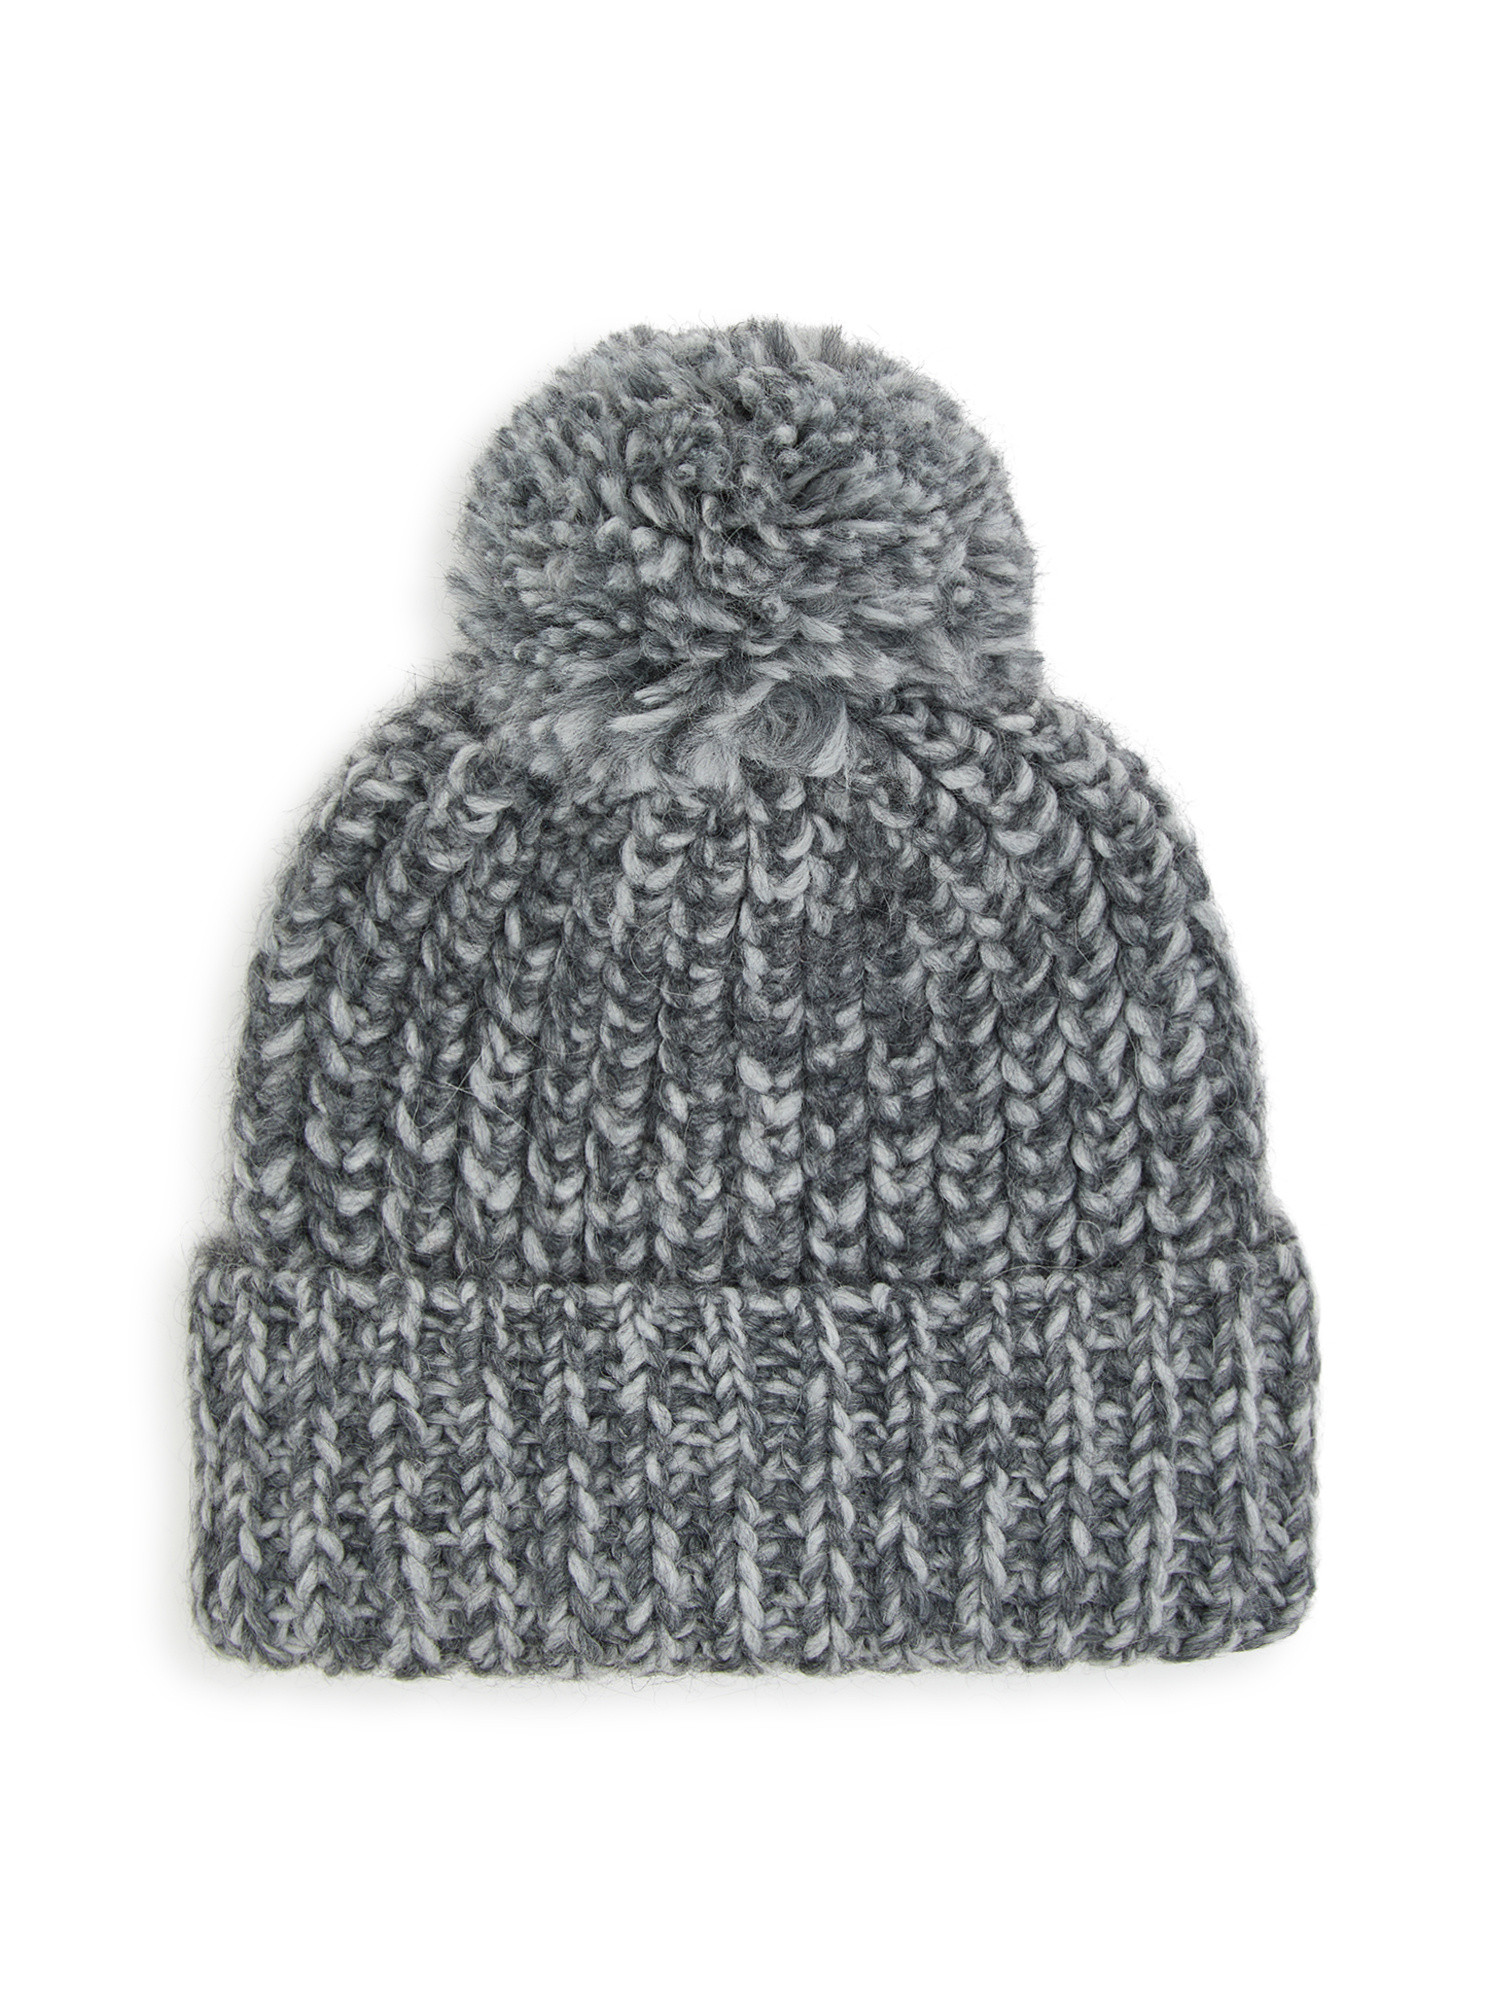 Luca D'Altieri - Beanie with pompon, Grey, large image number 0